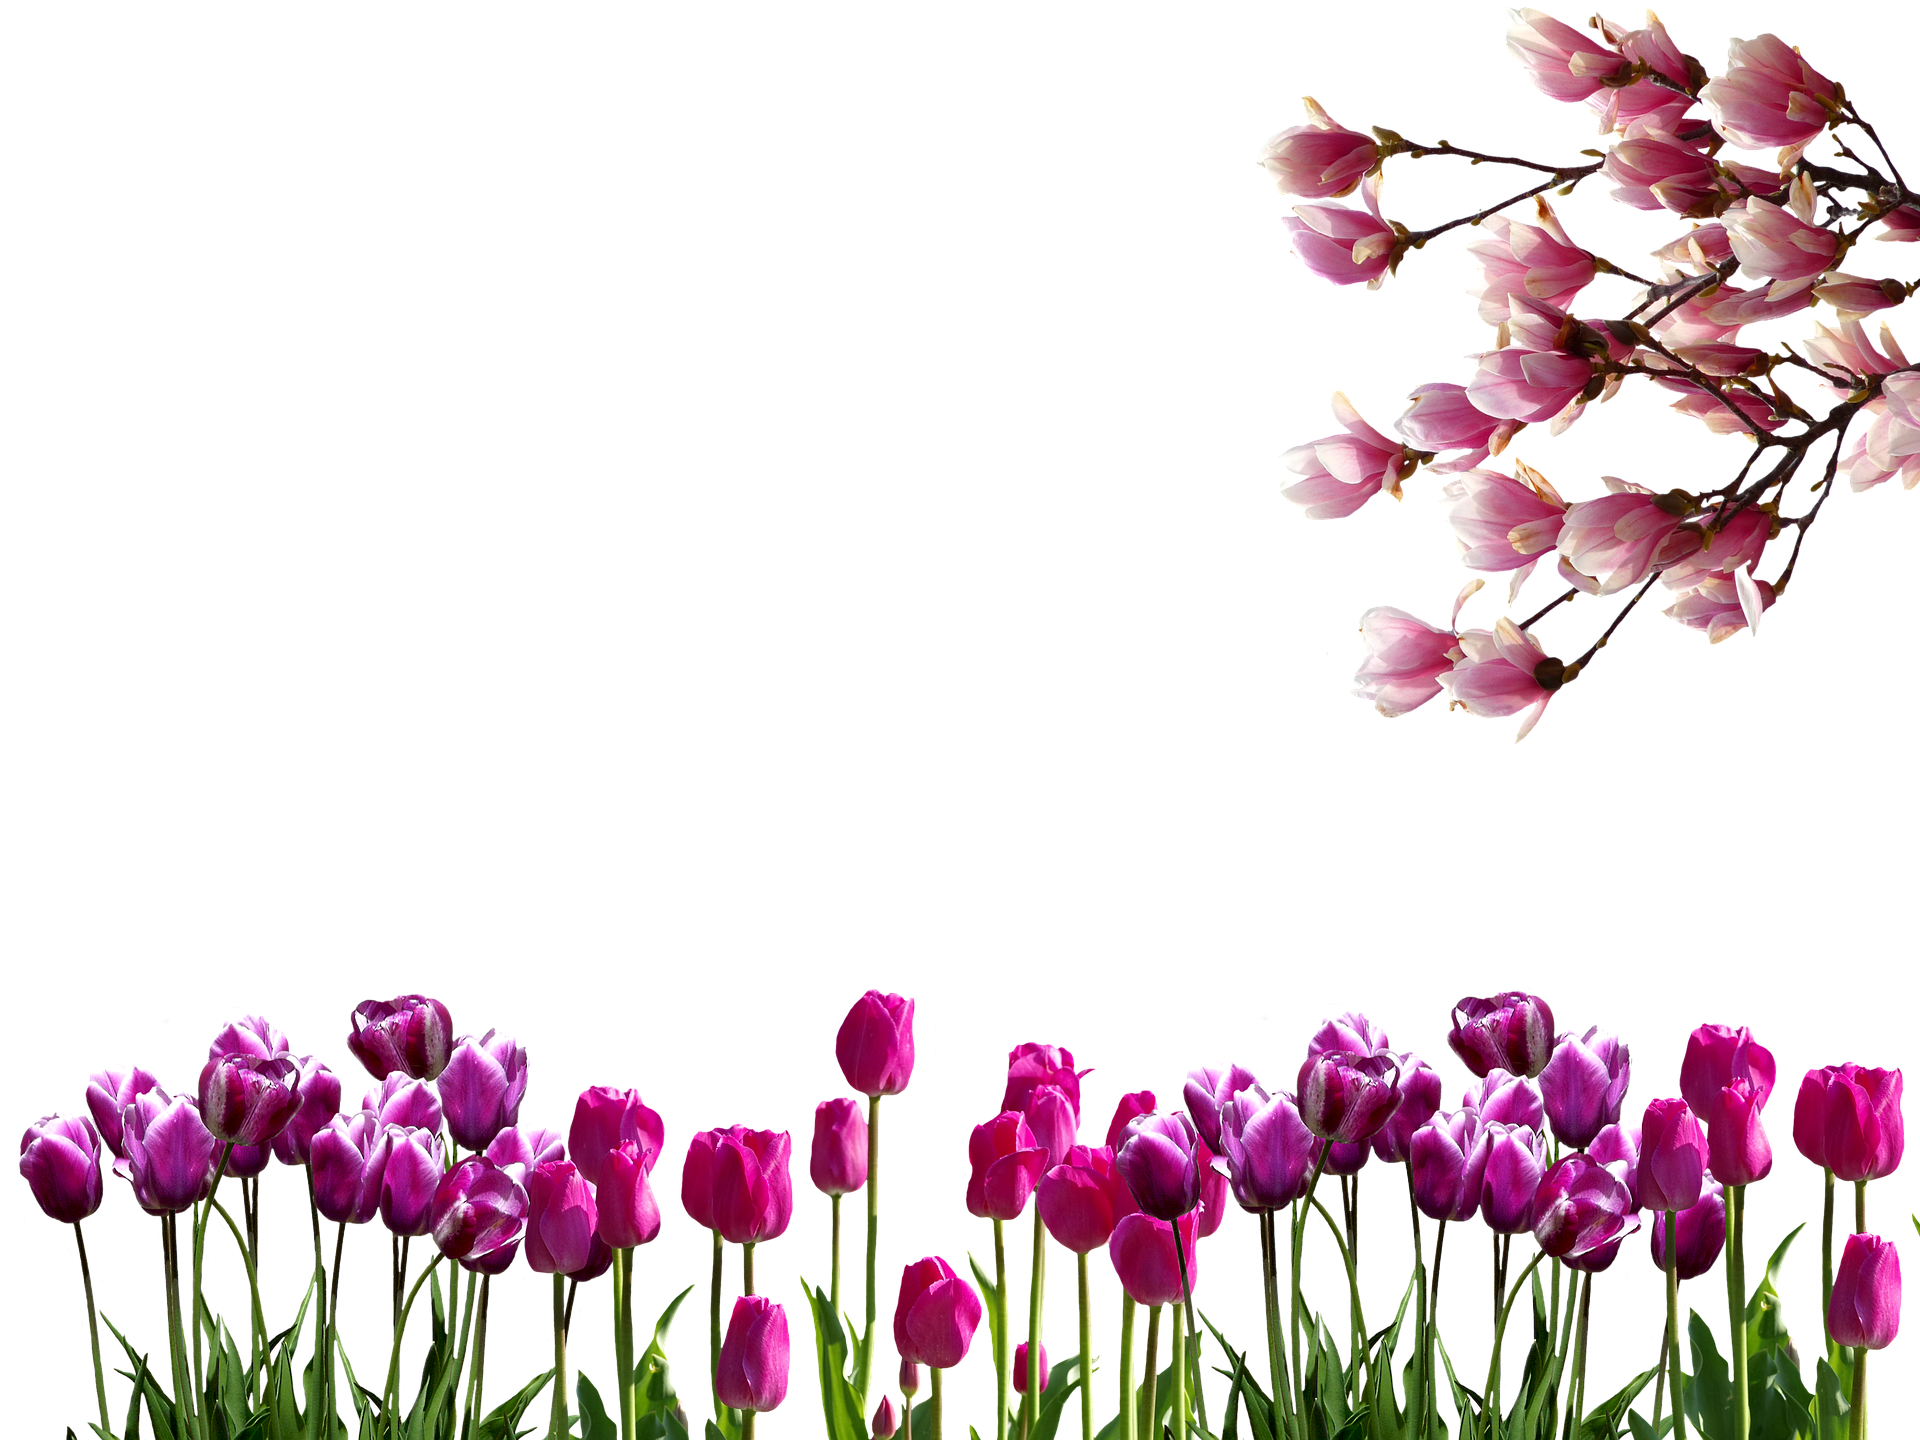 A Group Of Purple And Pink Tulips